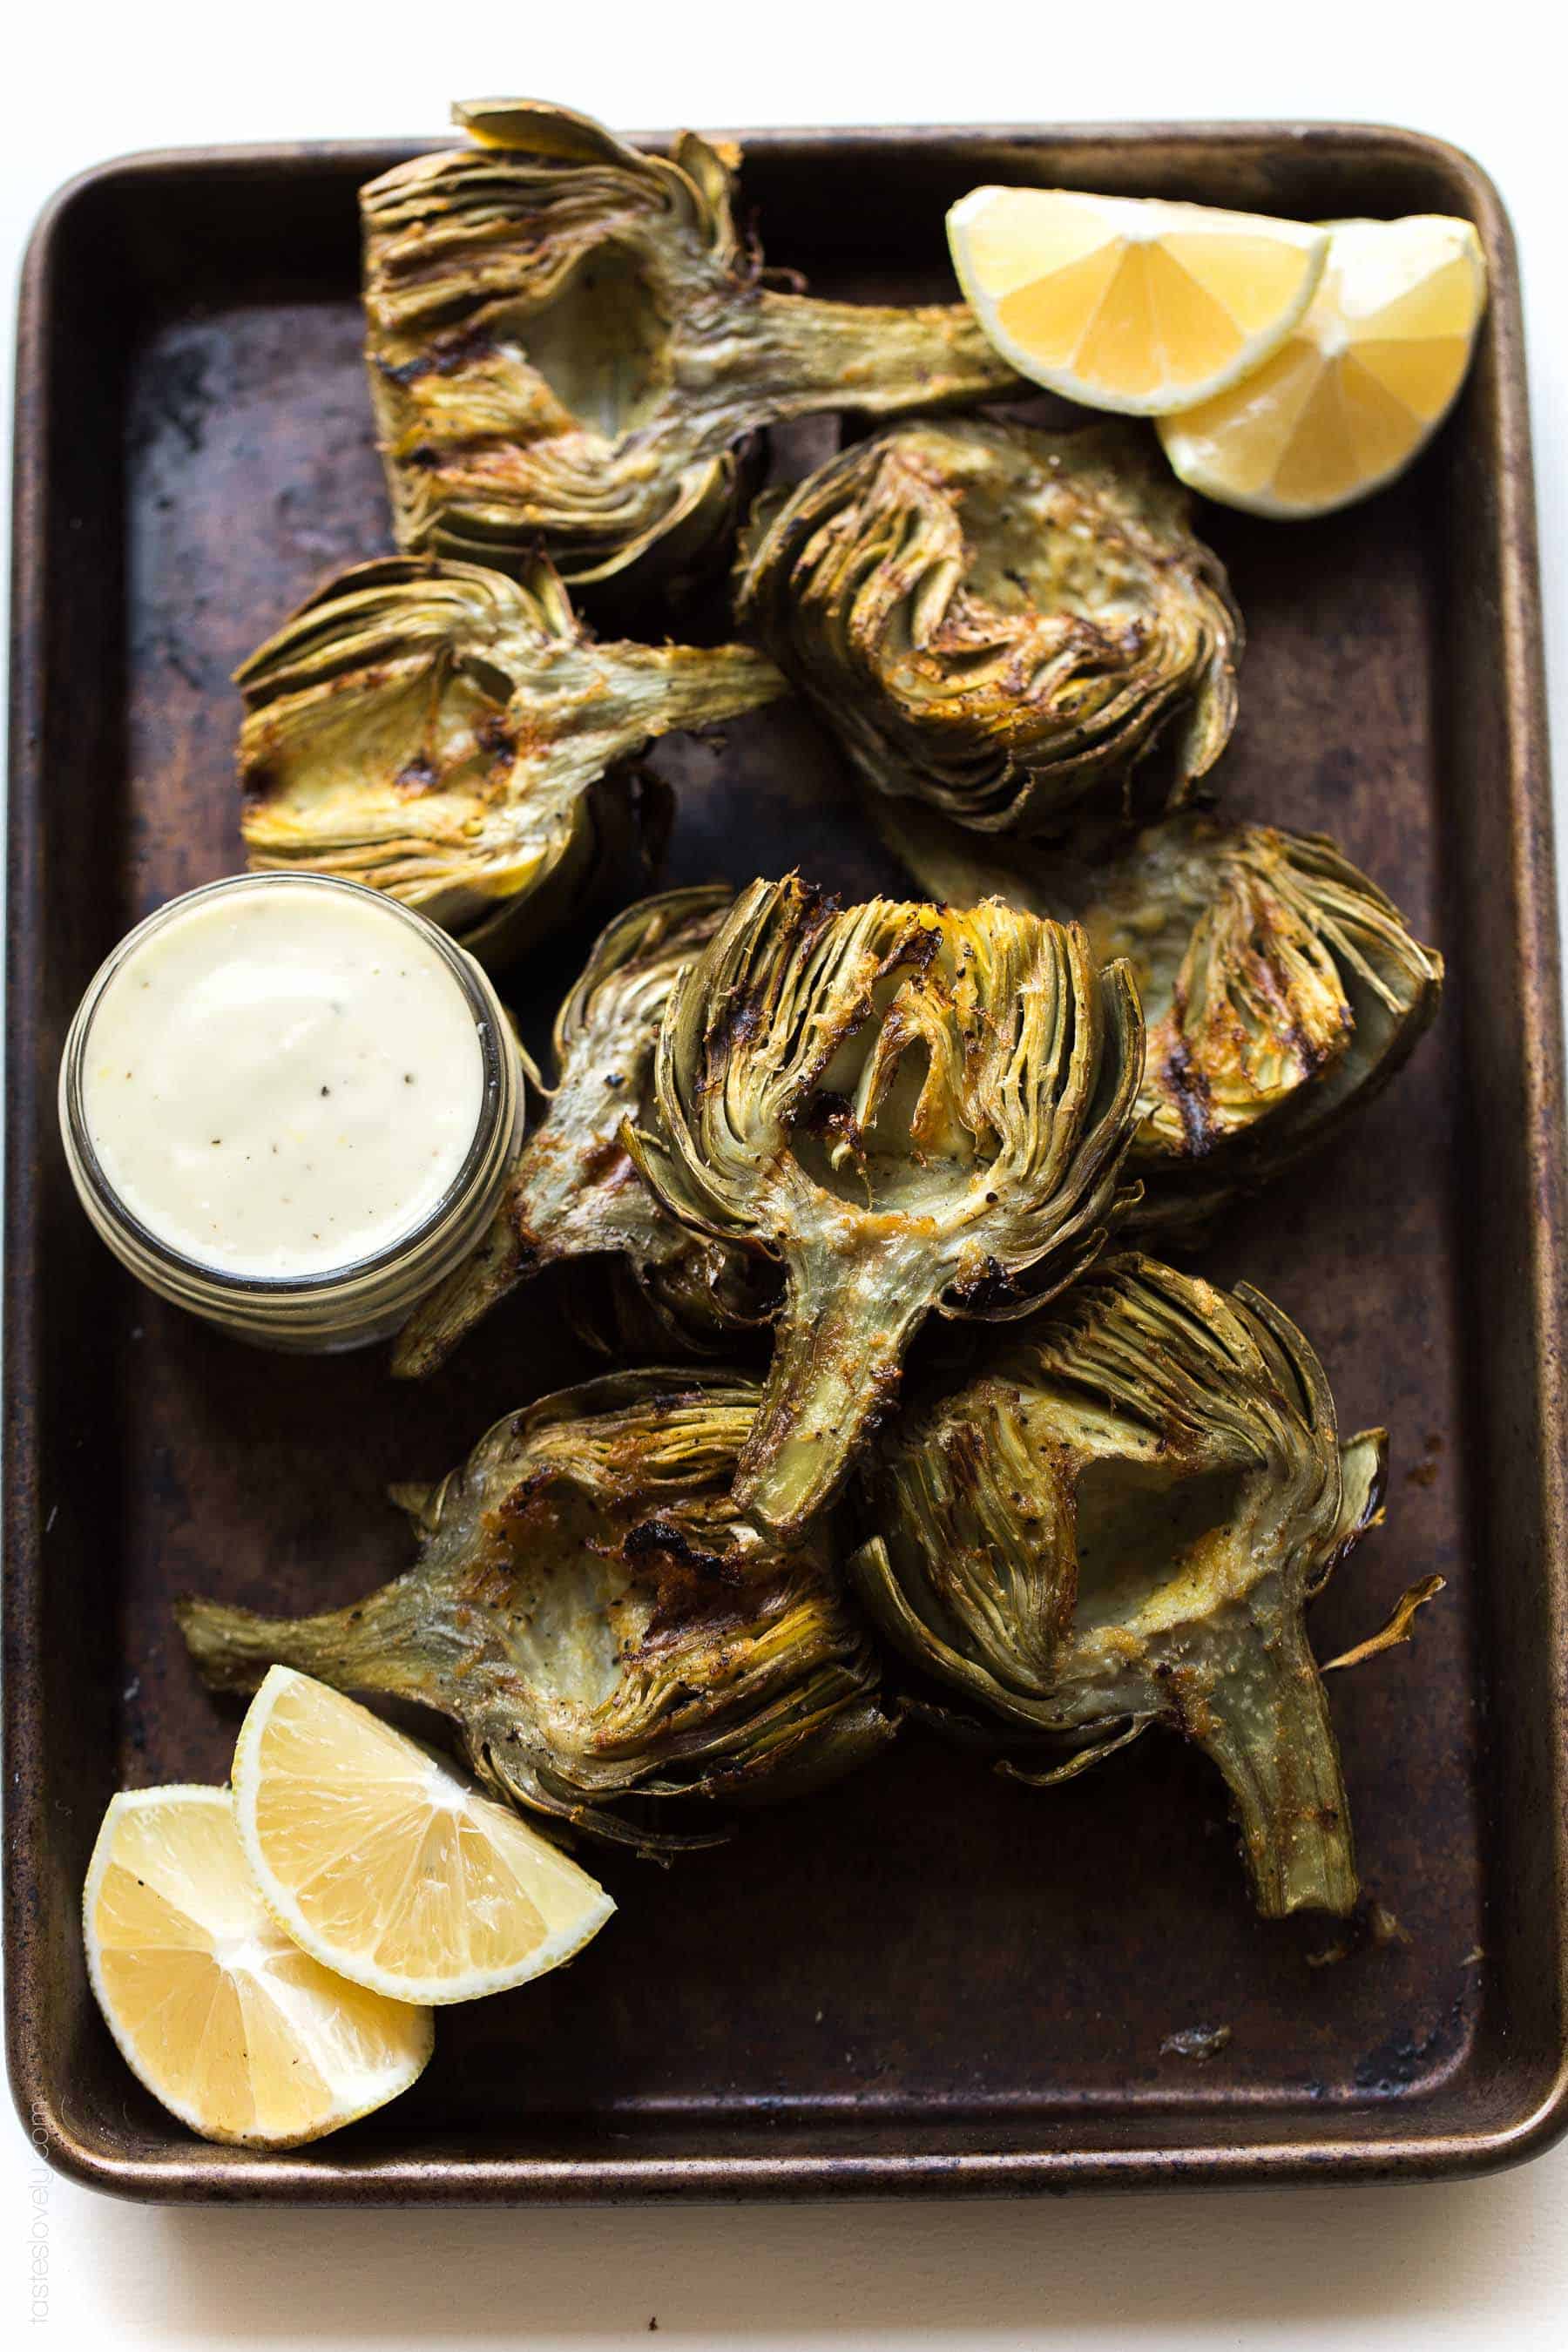 Paleo & Whole30 Grilled Artichokes with a lemon garlic basting oil and a lemon garlic aioli dipping sauce. A delicious appetizer or side dish recipe! Paleo, Whole30, gluten free, grain free, dairy free, sugar free, vegetarian, clean eating.